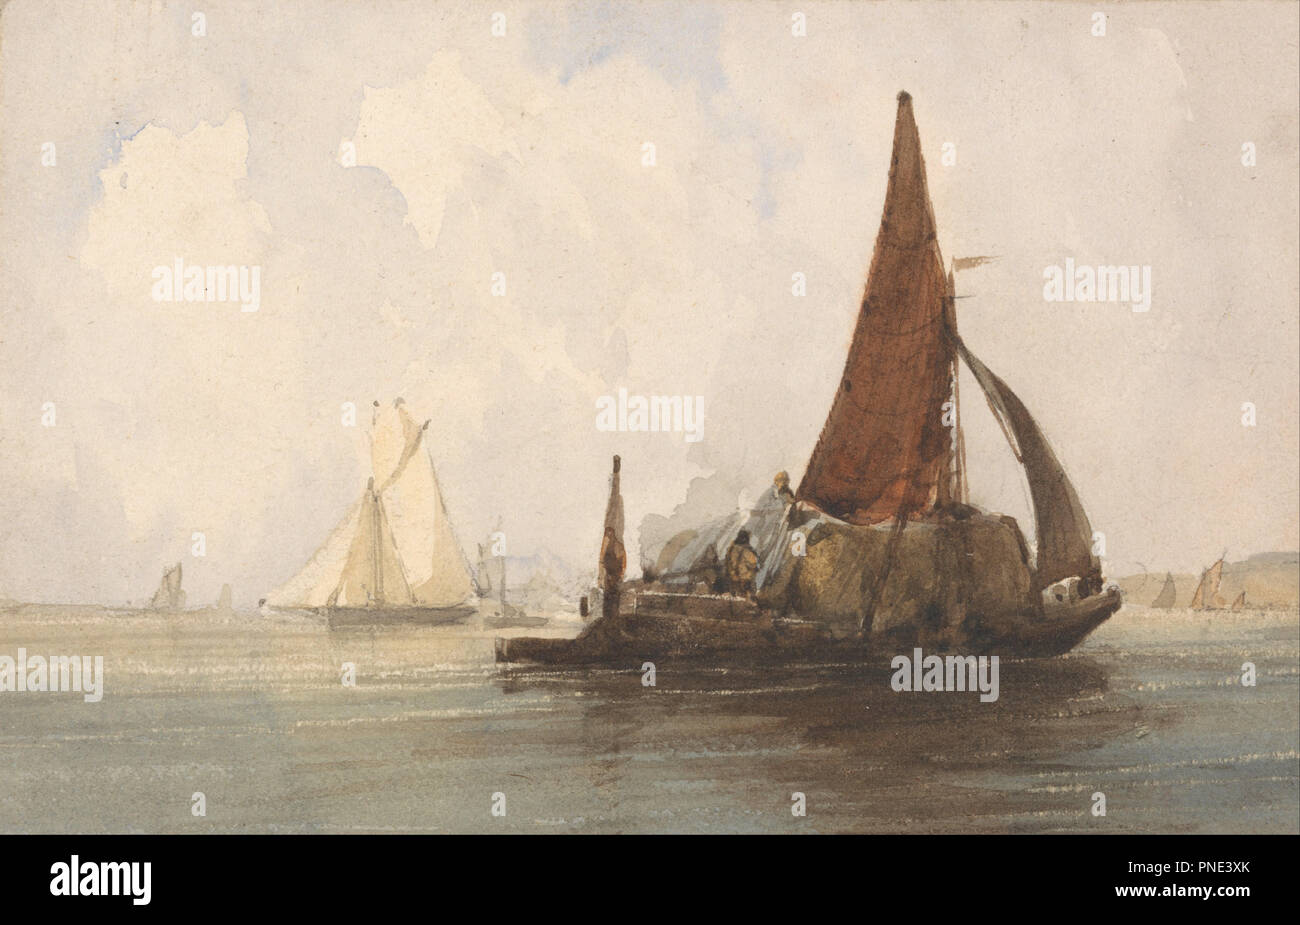 Hay Barge in a Calm Sea. Marine art. Watercolor and grahite on medium, cream, slightly textured wove paper. Height: 127 mm (5 in); Width: 197 mm (7.75 in). Author: CHARLES BENTLEY. Stock Photo